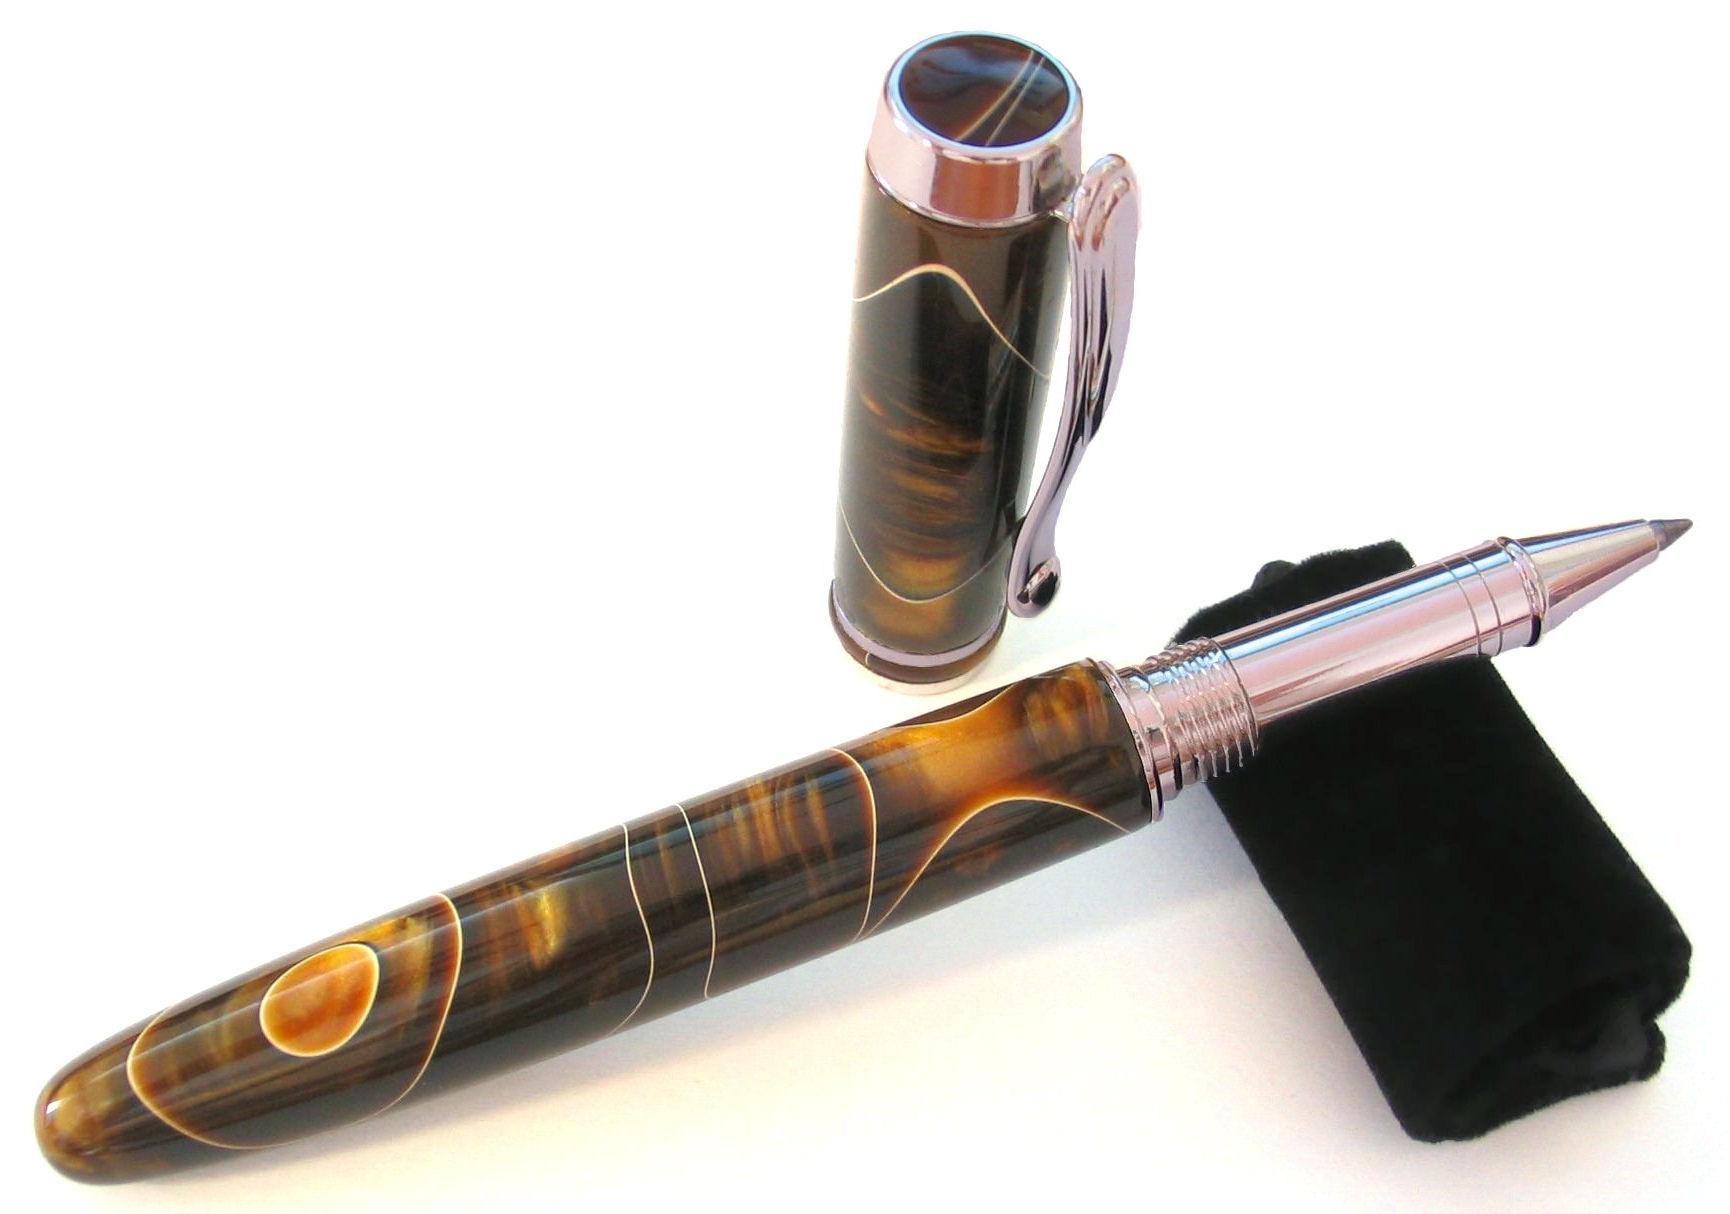 Closed End RB in Tobacco Marble Celluloid